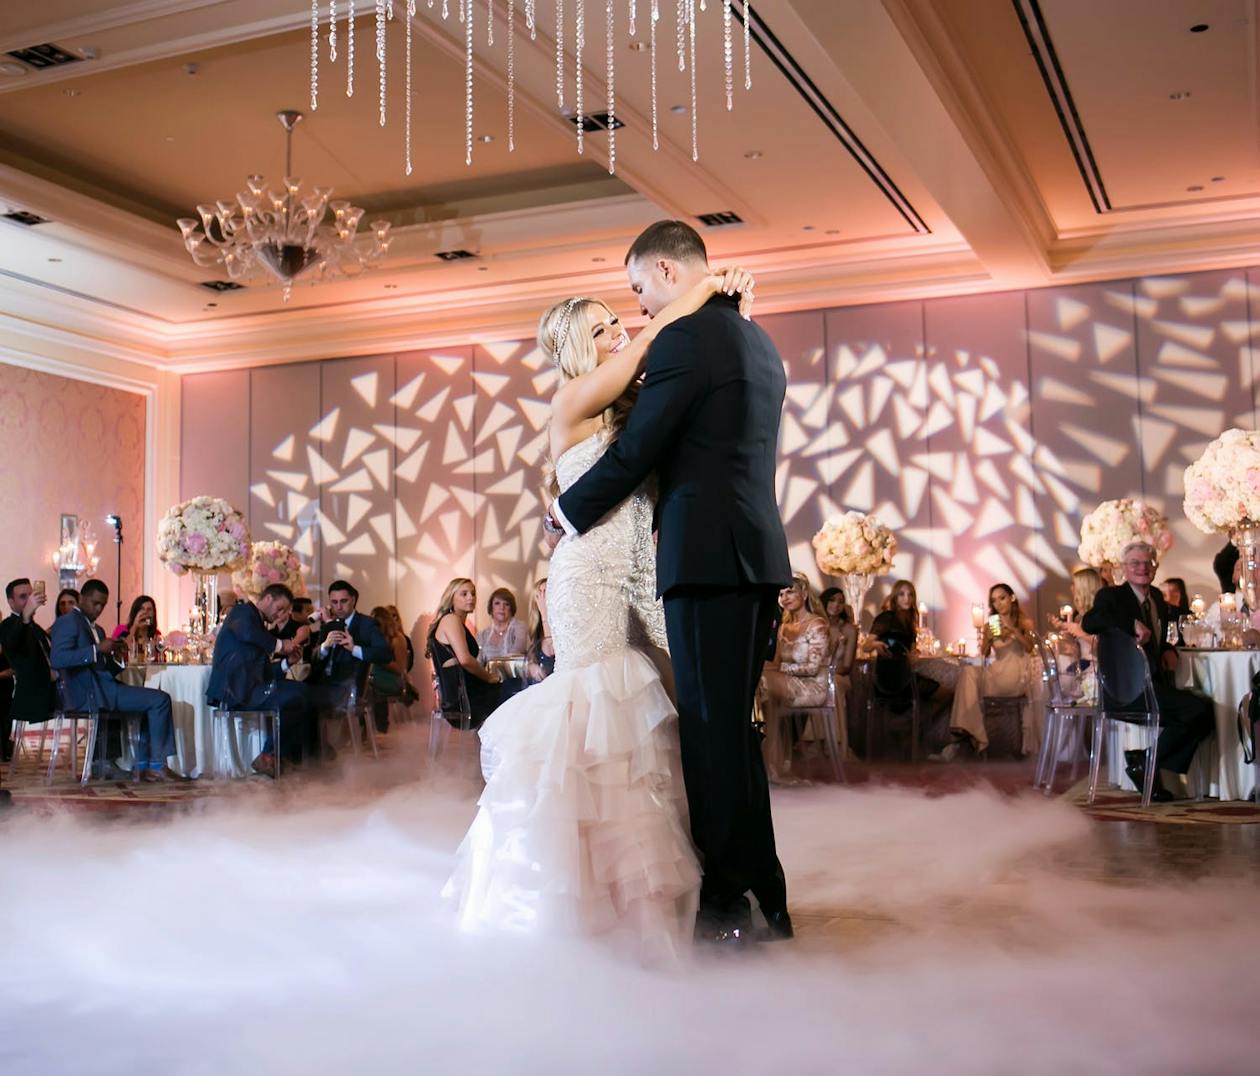 First dance in pink-uplit ballroom with ice fractal lighting projections and swirling fog | PartySlate